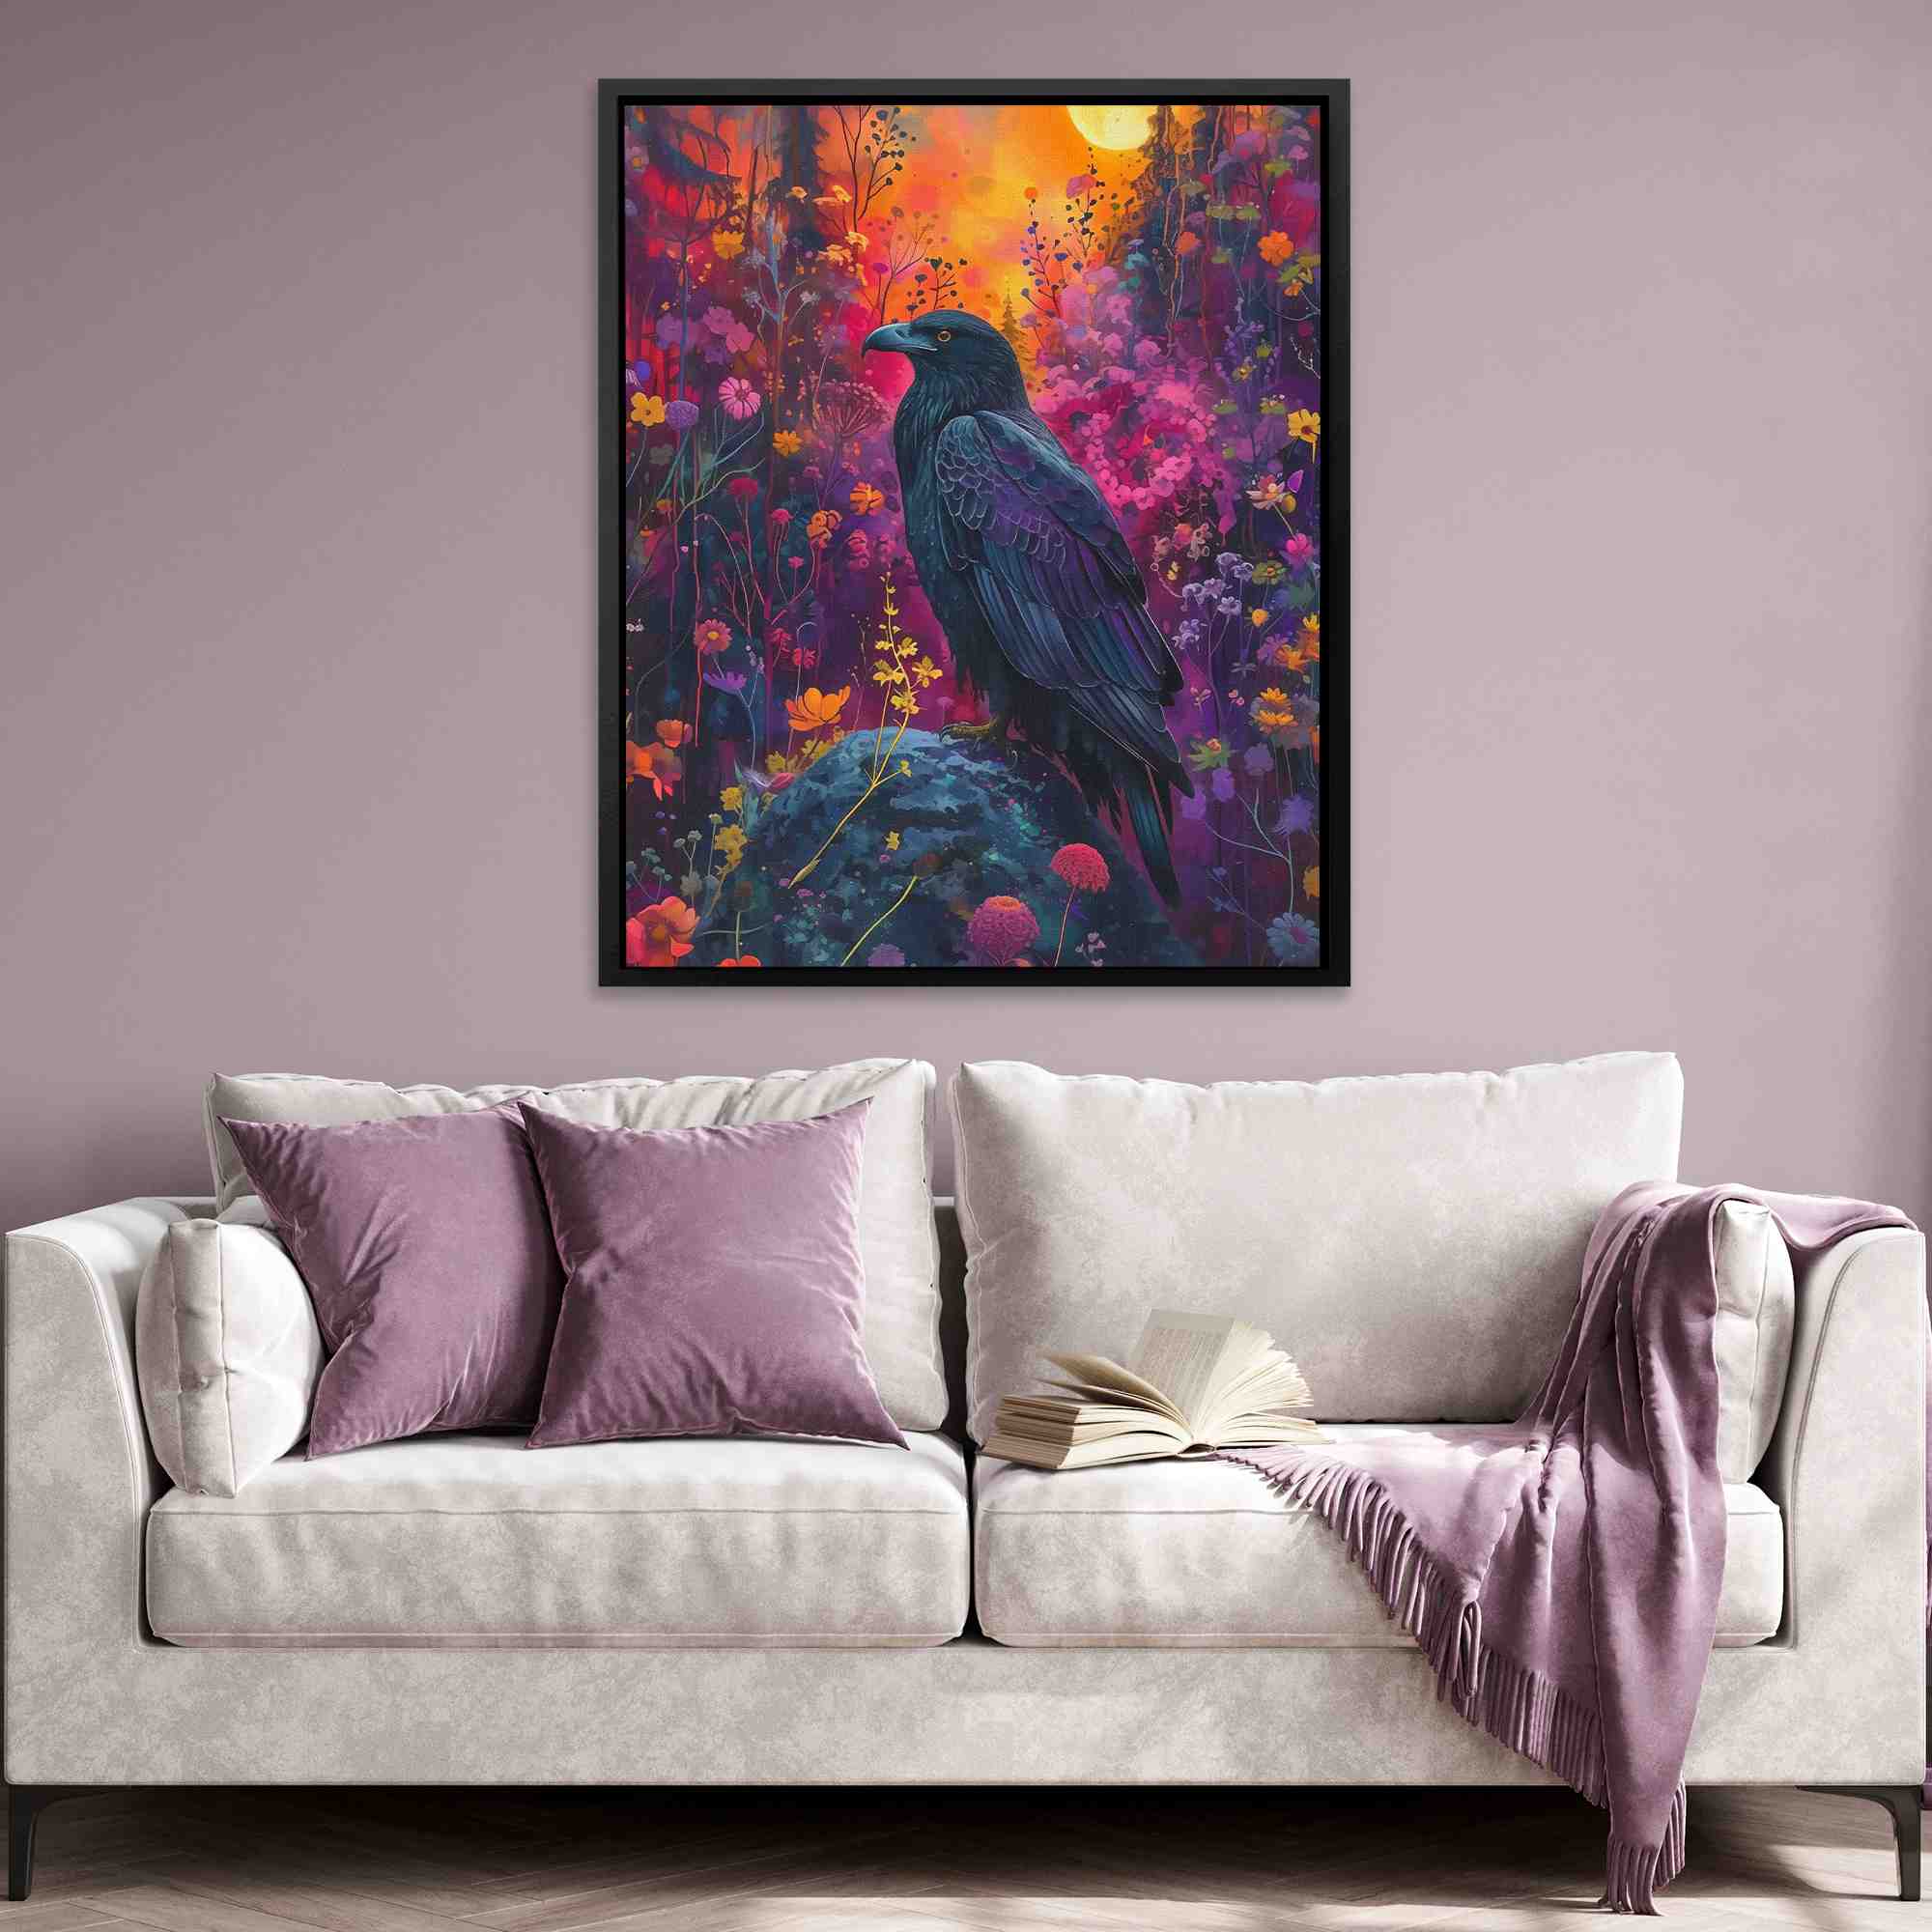 a painting of a black bird sitting on a rock